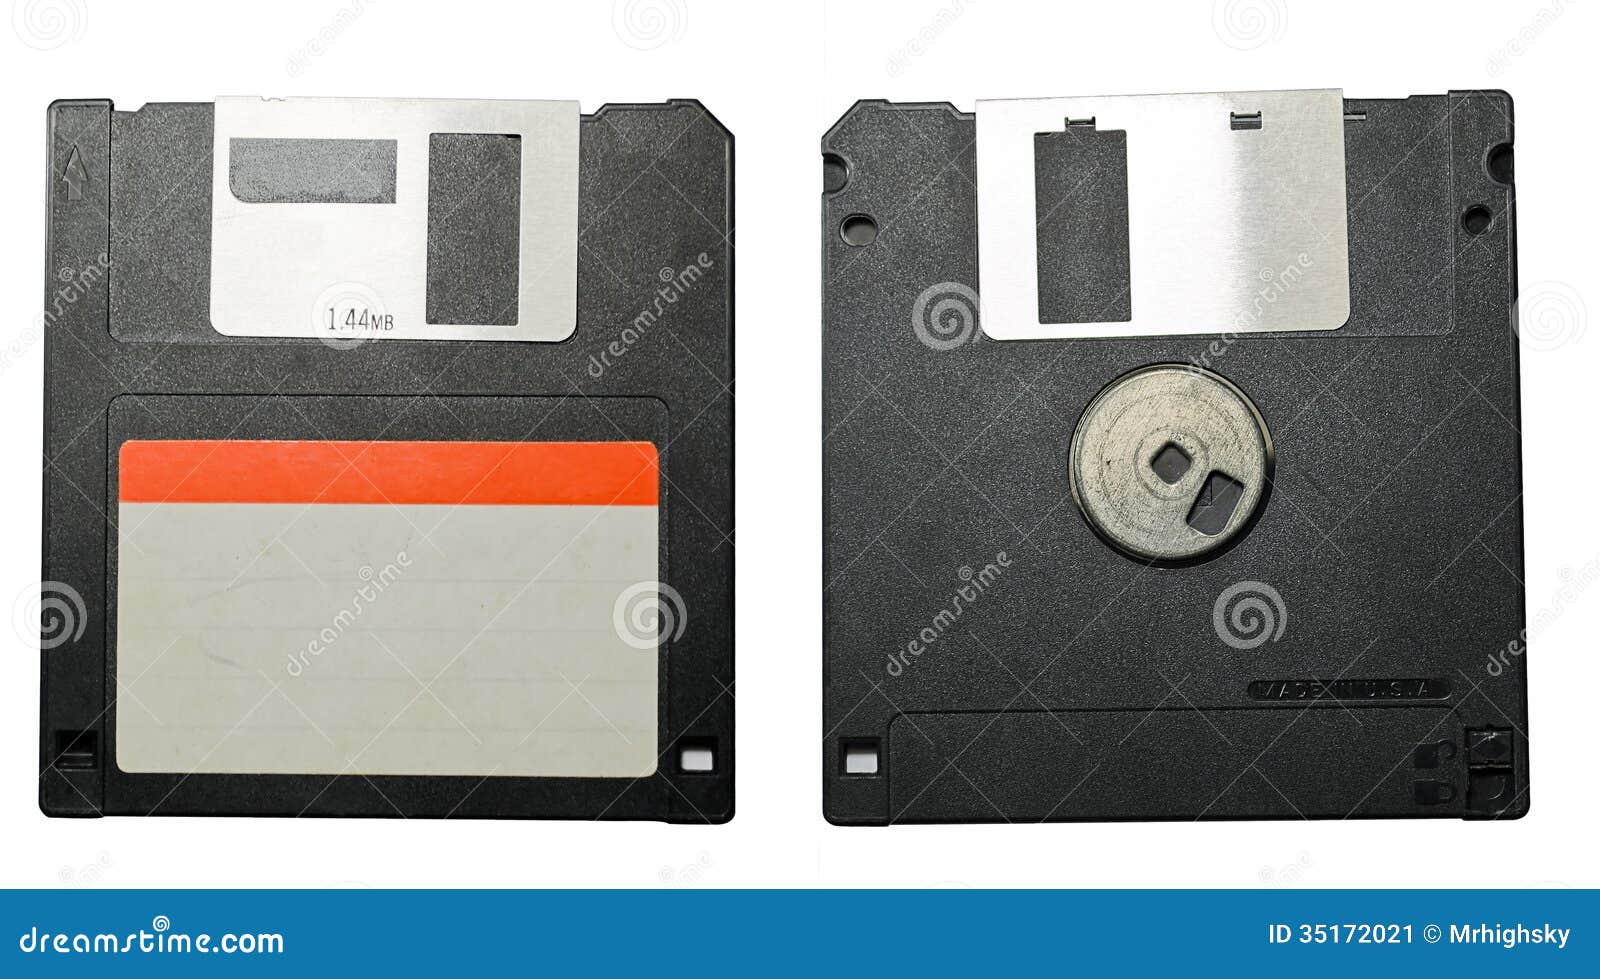 floppy disk front and back